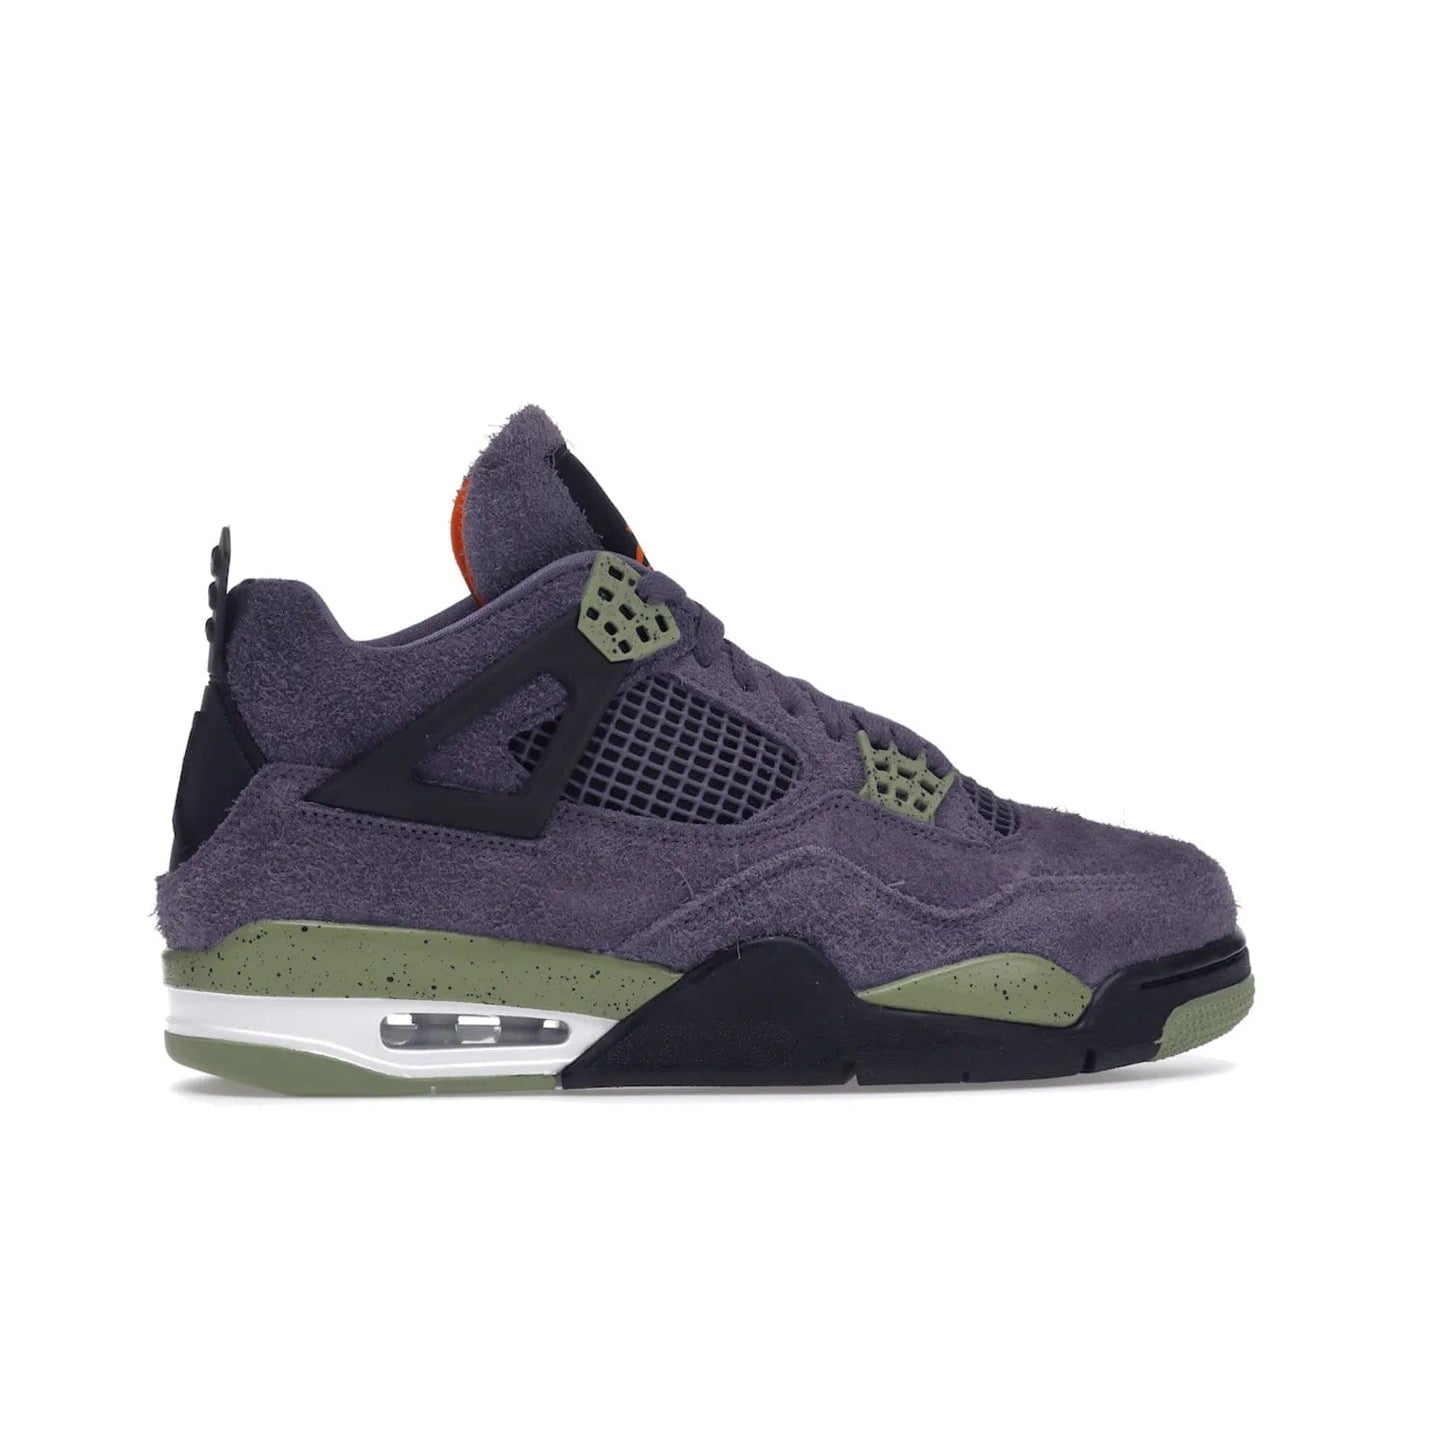 Jordan 4 Retro Canyon Purple (Women's) - Image 36 - Only at www.BallersClubKickz.com - New Air Jordan 4 Retro Canyon Purple W sneaker features shaggy purple suede, lime highlights & safety orange Jumpman branding. Classic ankle-hugging silhouette with modern colors released 15/10/2022.